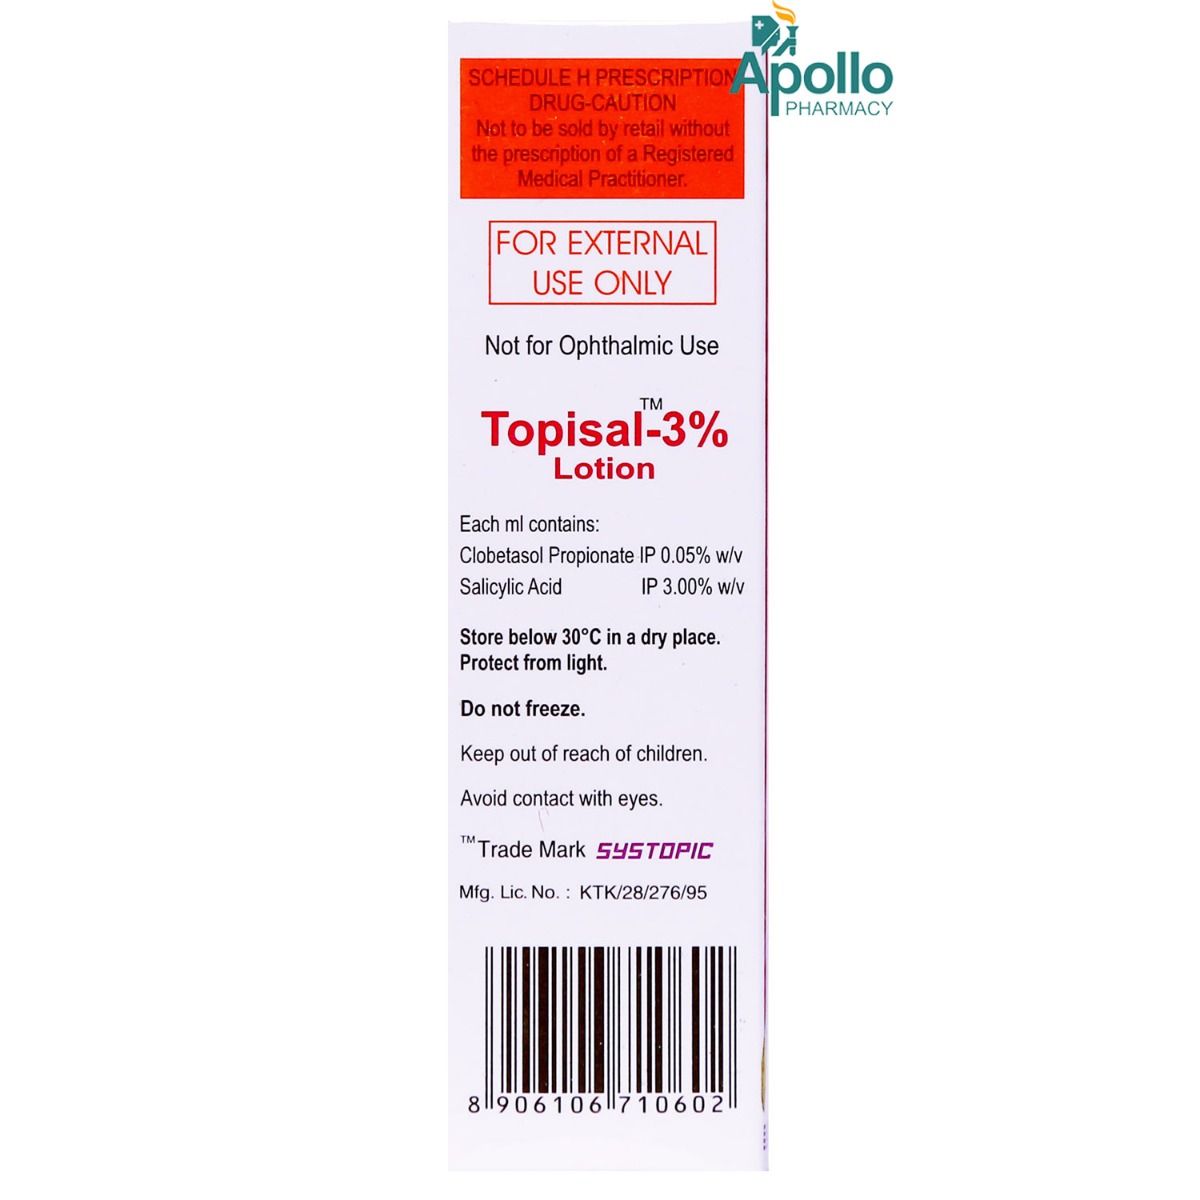 Topisal-3% Lotion 30 ml Price, Uses, Side Effects, Composition - Apollo  Pharmacy